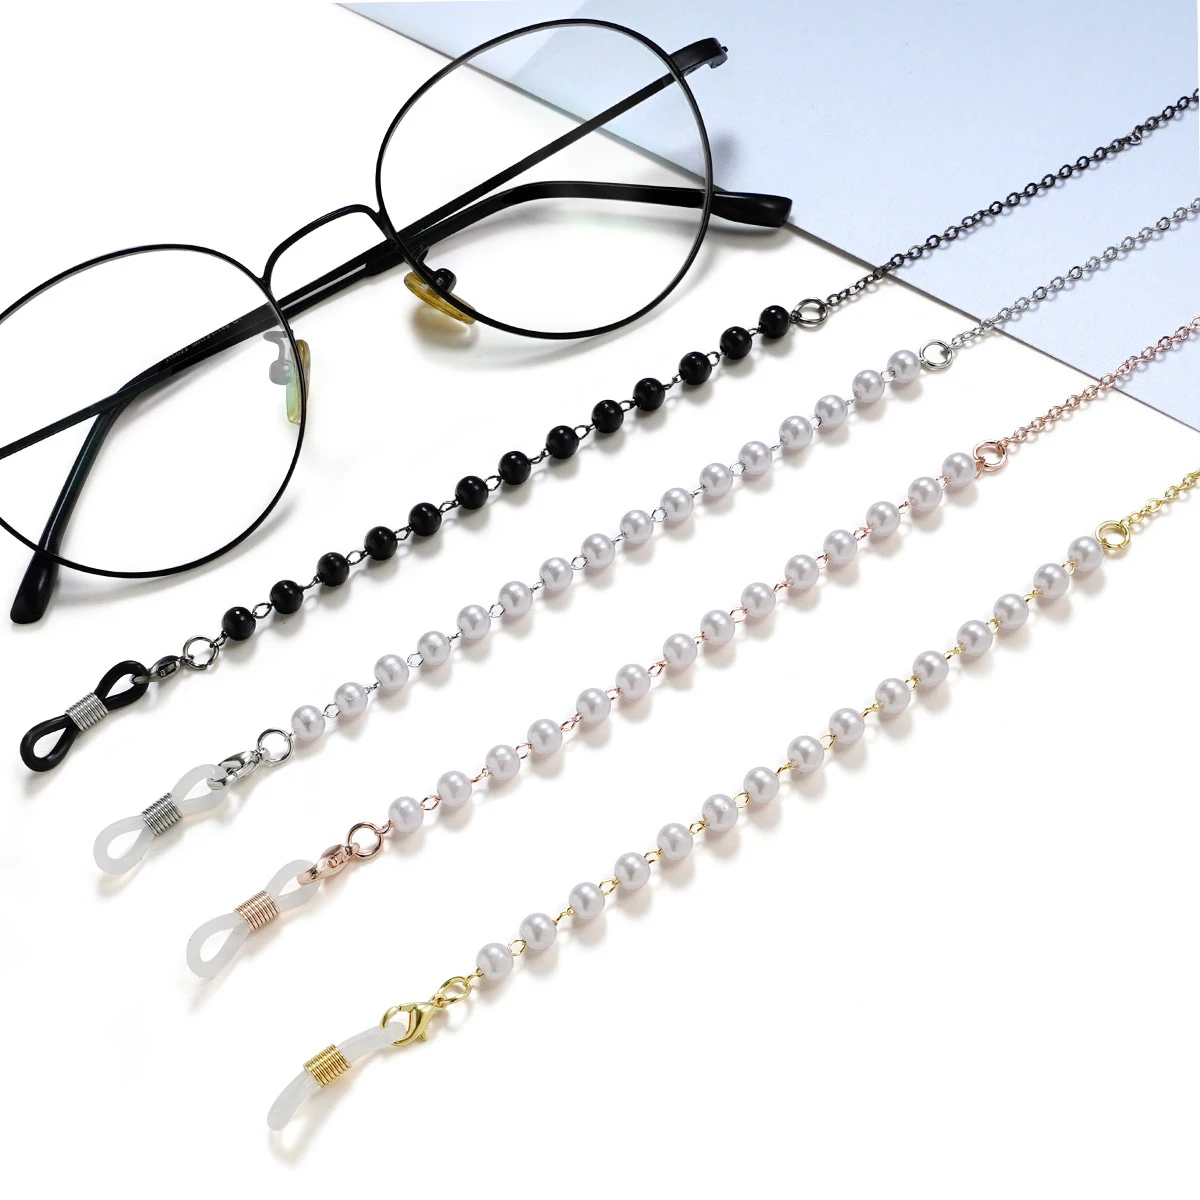 

2021 Pearl Glasses Chain Crystal Masking Strap Glass Bead Facemask Lanyard Sunglasses Chains Eyewear Necklace Eyeglass Retainer, As show